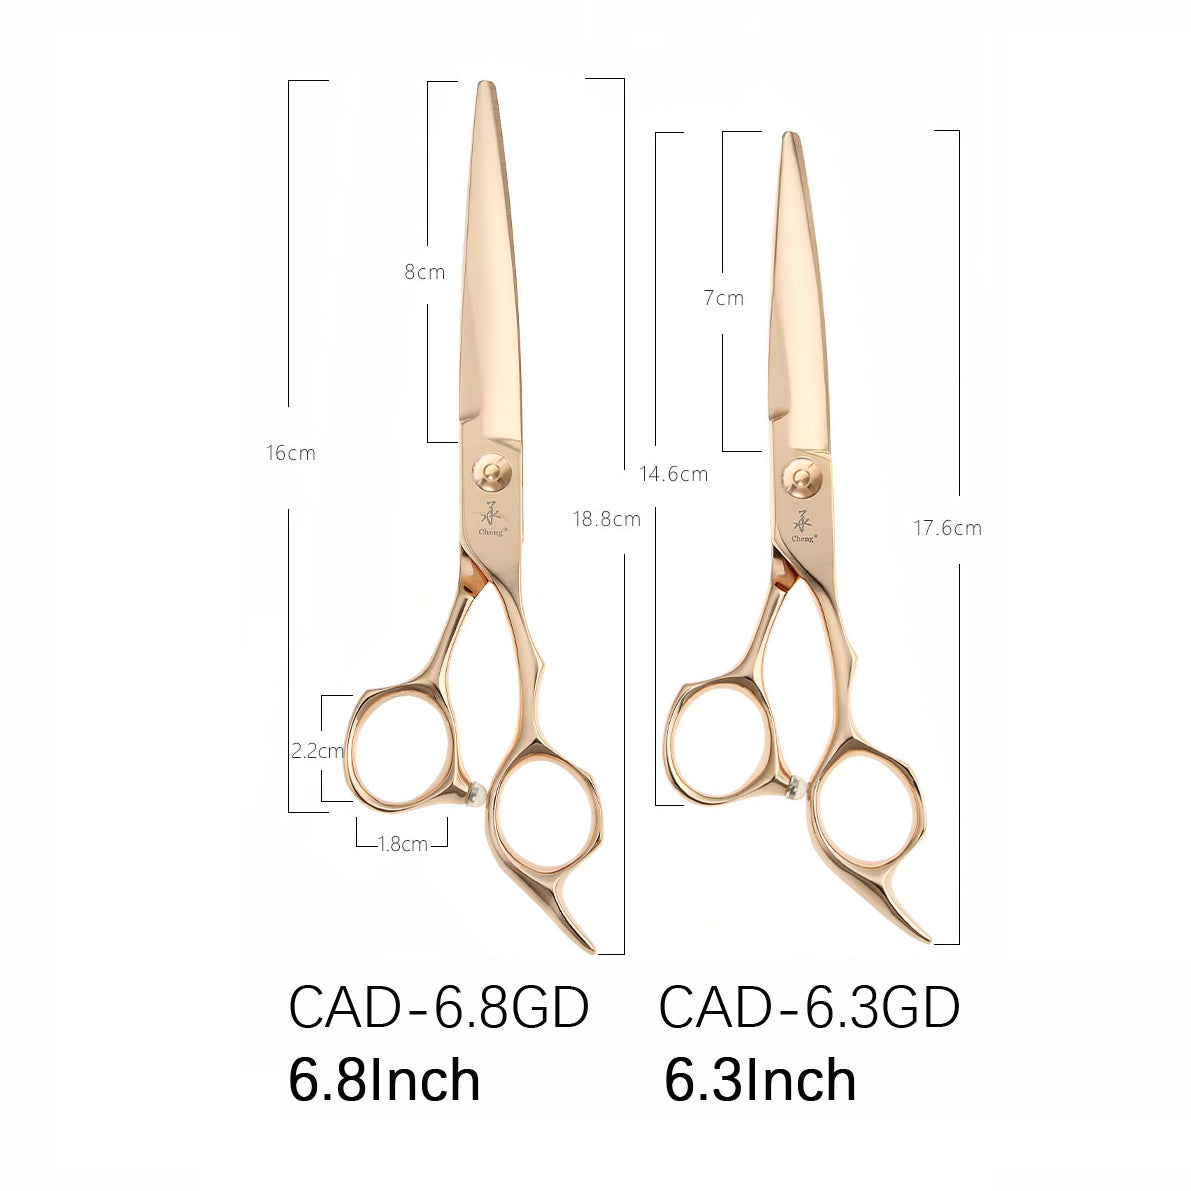 NEW CAD-6.3GD 6.3Inch/ 6.8Inch Hair Cutting Scissors Rose Gold Color –  Cheng Scissors